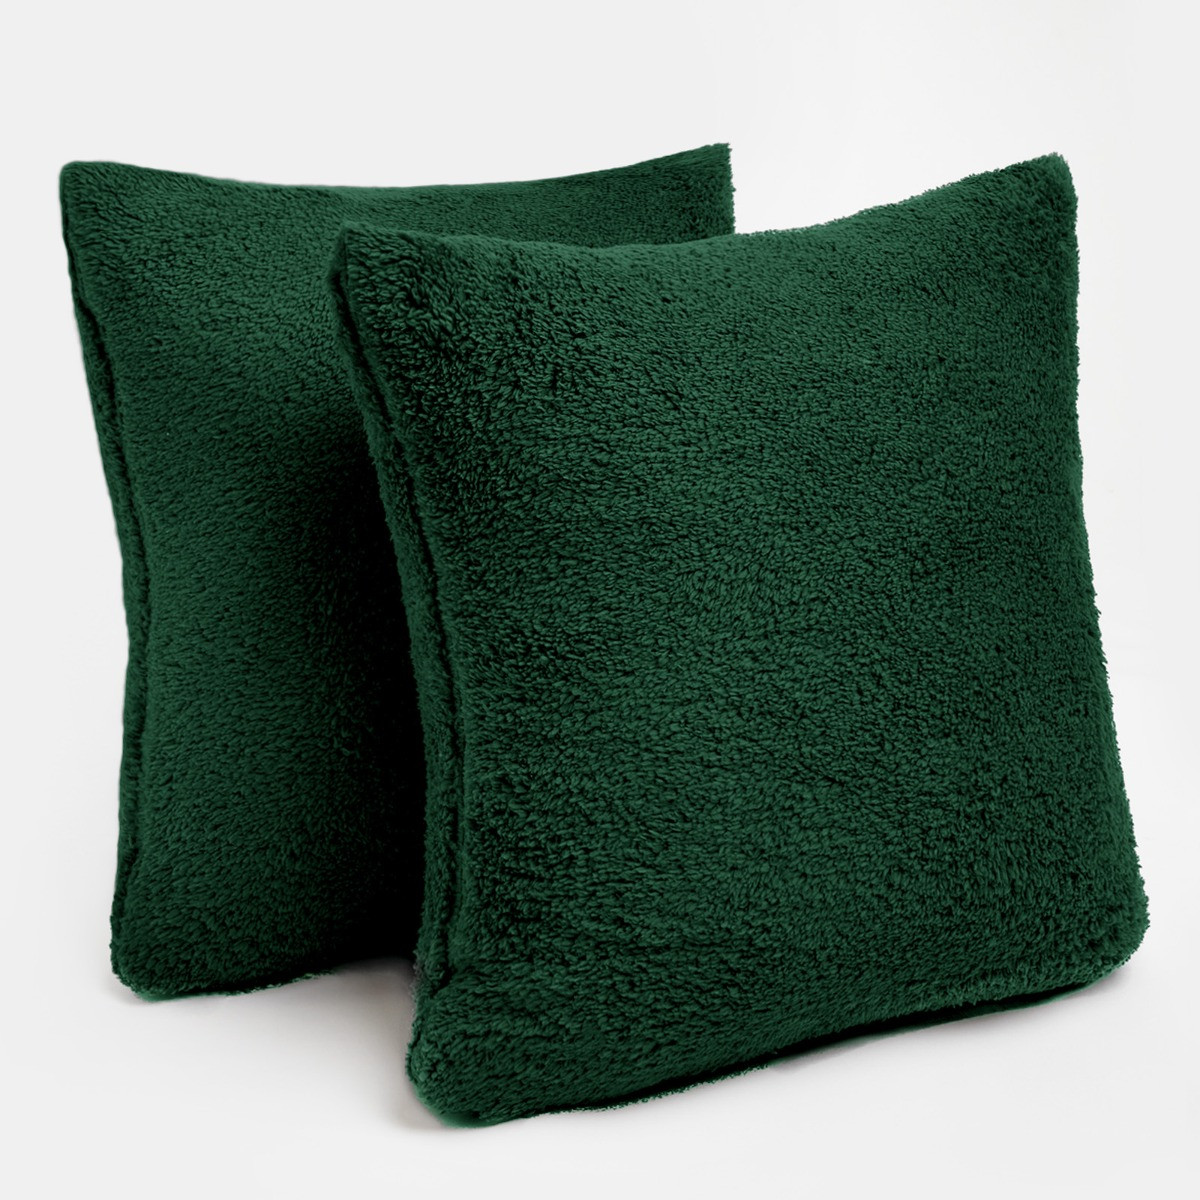 Brentfords Teddy Cushion Covers - Forest Green>